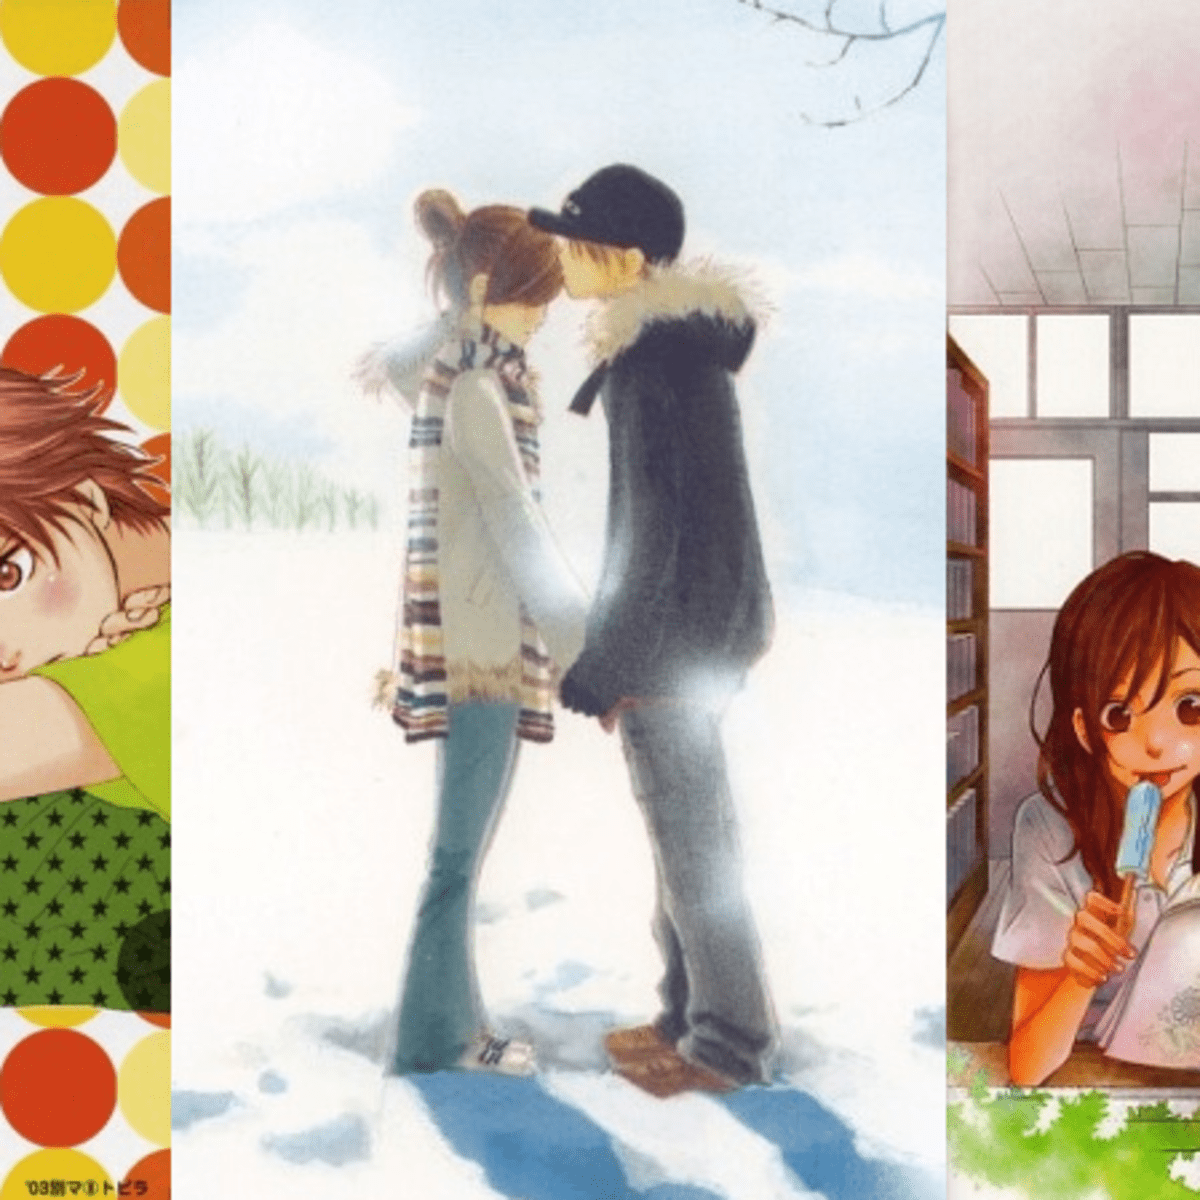 Top 22 Best  Most Popular Romance Anime Series To Date